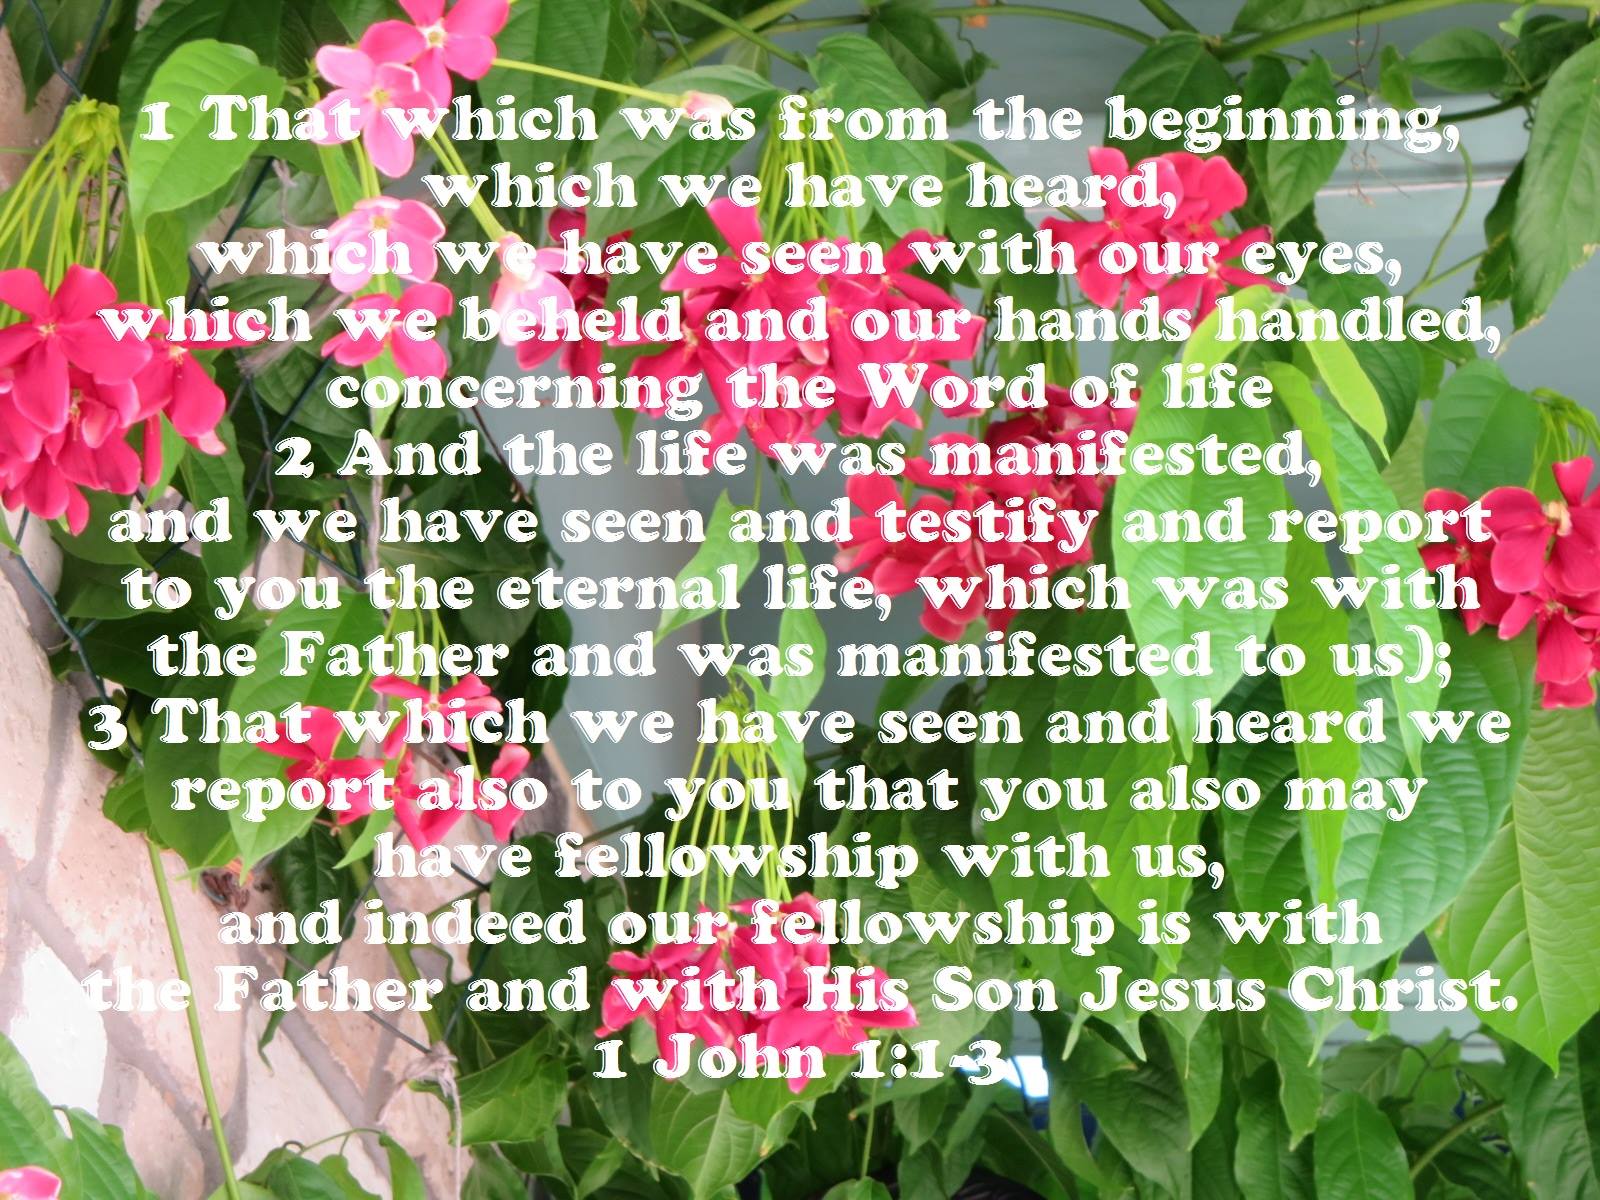 1 John 1:1-3 That which was from the beginning, which we have heard, which we have seen with our eyes, which we beheld and our hands handled, concerning the Word of life, (And the life was manifested, and we have seen and testify and report to you the eternal life, which was with the Father and was manifested to us); That which we have seen and heard we report also to you that you also may have fellowship with us, and indeed our fellowship is with the Father and with His Son Jesus Christ.